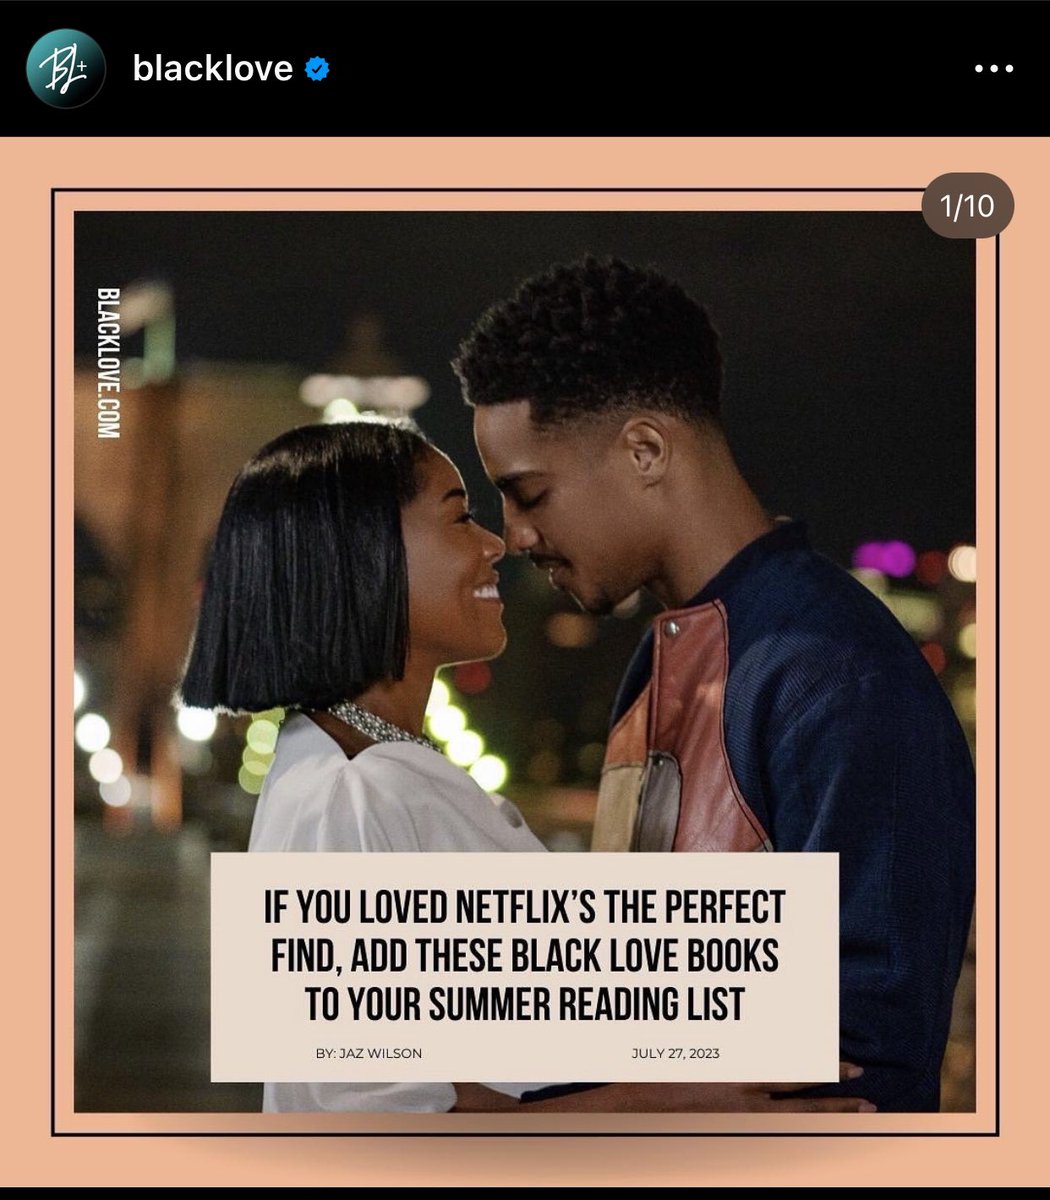 It’s never surprising but always disappointing that these curated Black Love book lists always have a sprinkle of interracial romance on them.   

Black Love/ Black Romance is a romance between Black Characters. 

Here’s some Black Romance to add to your list @blacklovedoc